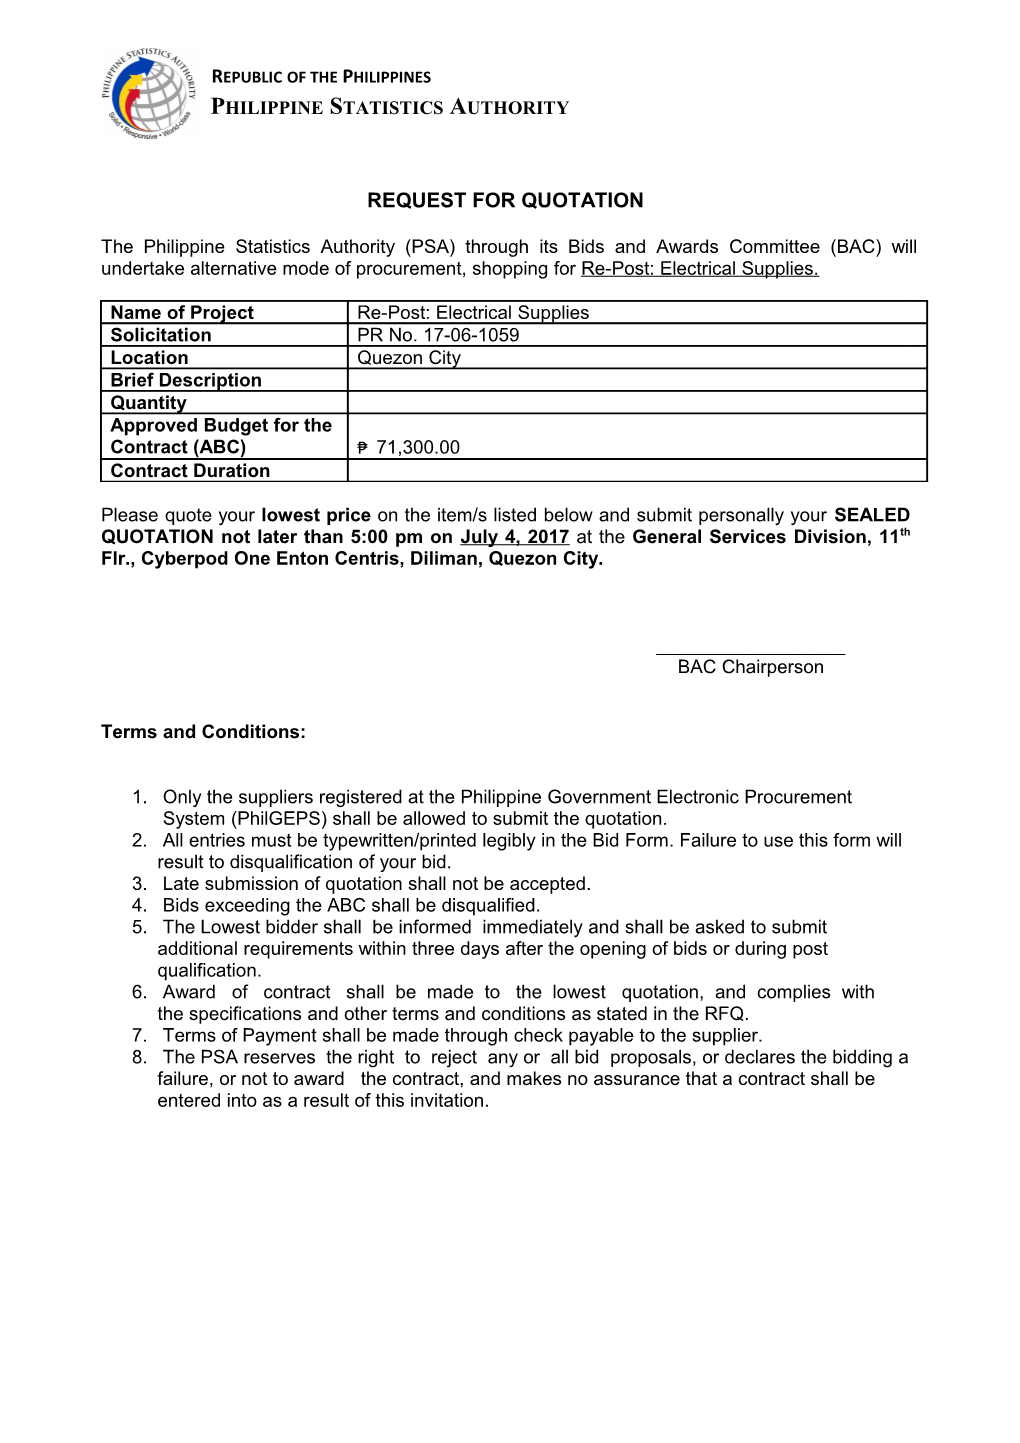 Request for Quotation s23